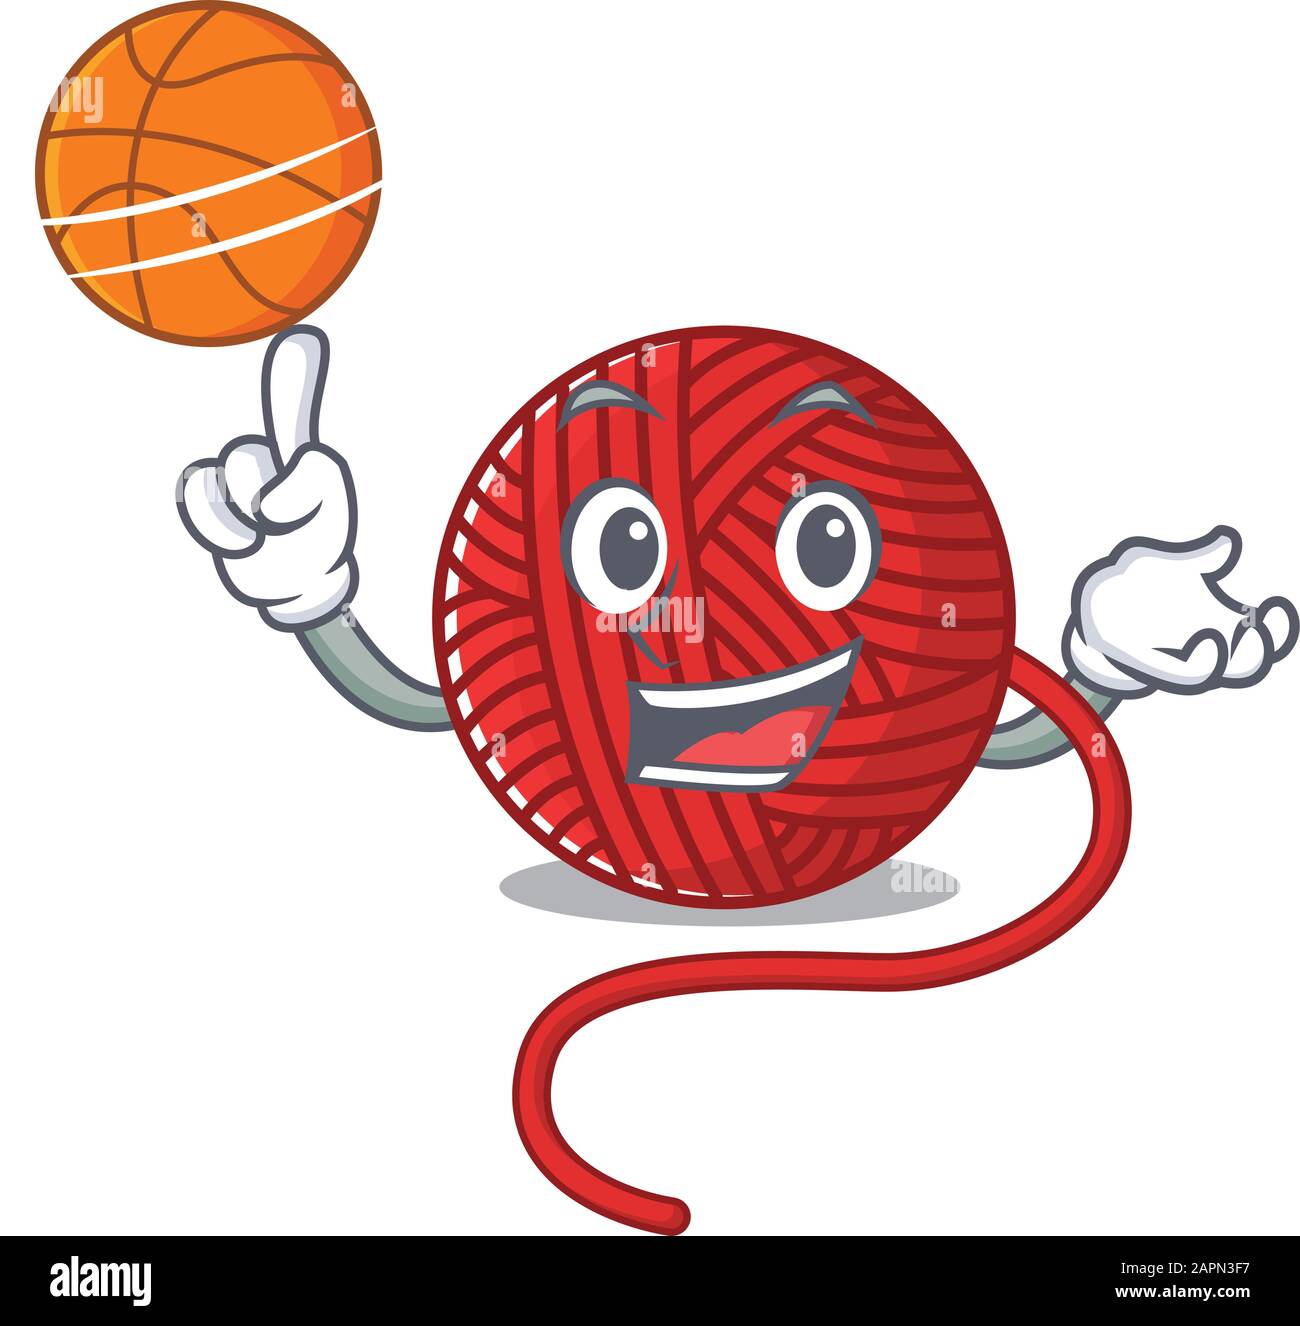 A mascot picture of red wool yarn cartoon character playing basketball Stock Vector